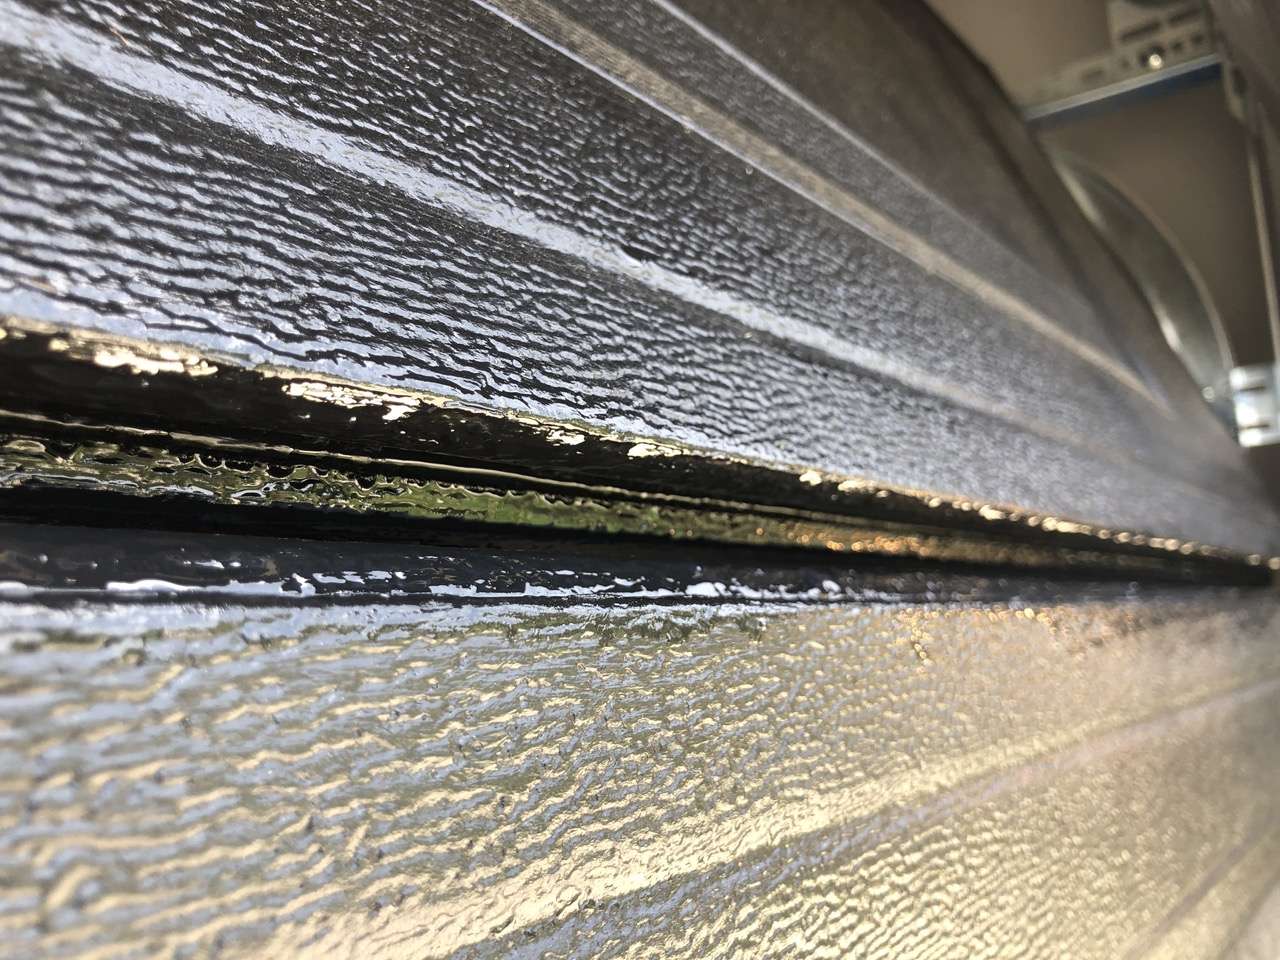 Black paint applied in between the garage door sections is causing the door to make popping noises when opening.